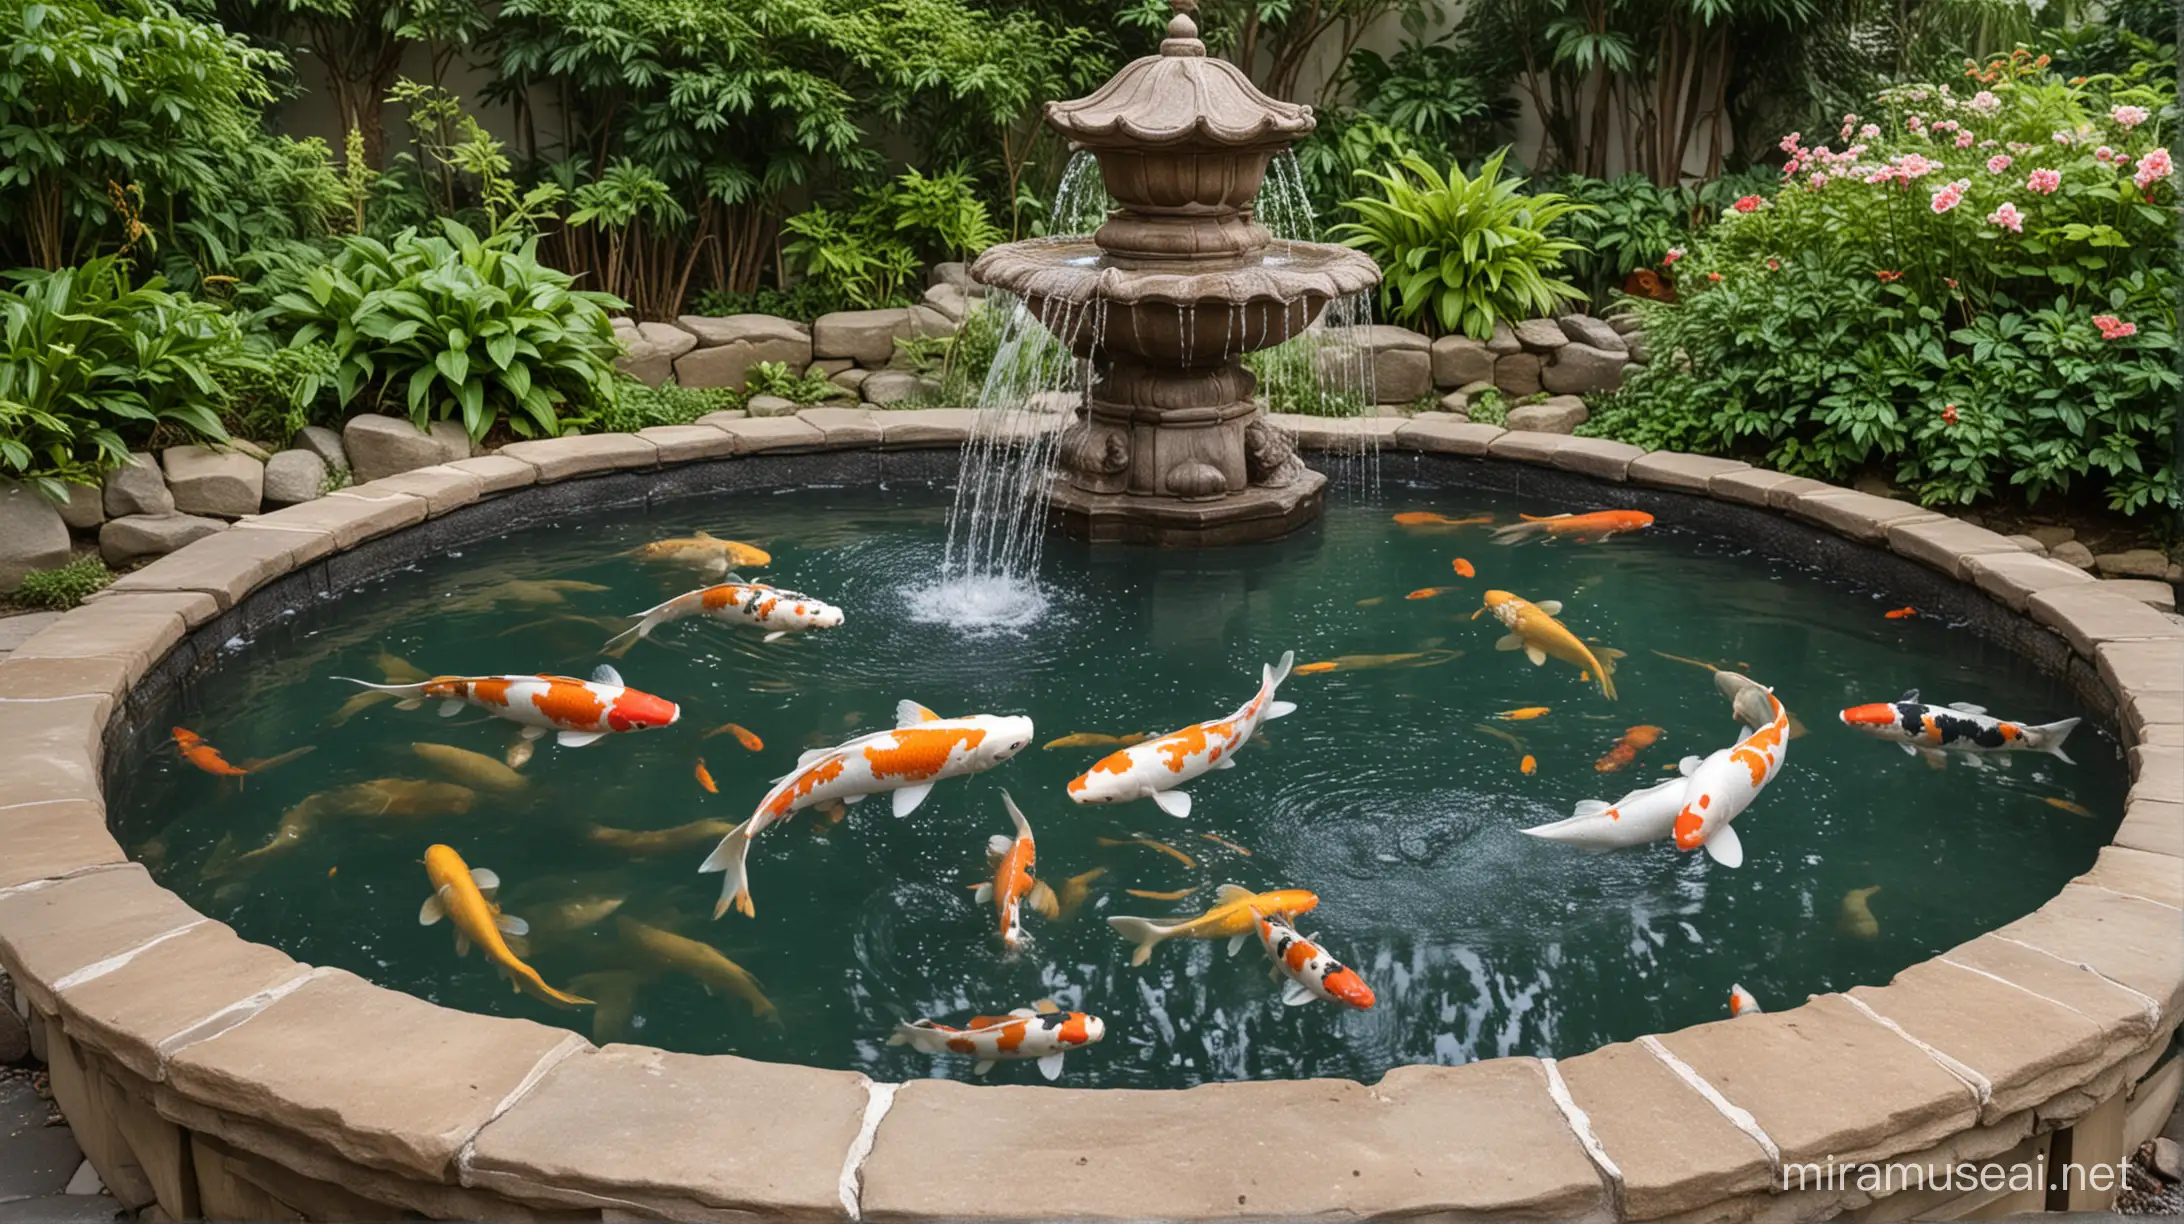 Tranquil Koi Fish Pond with Ornate Fountain